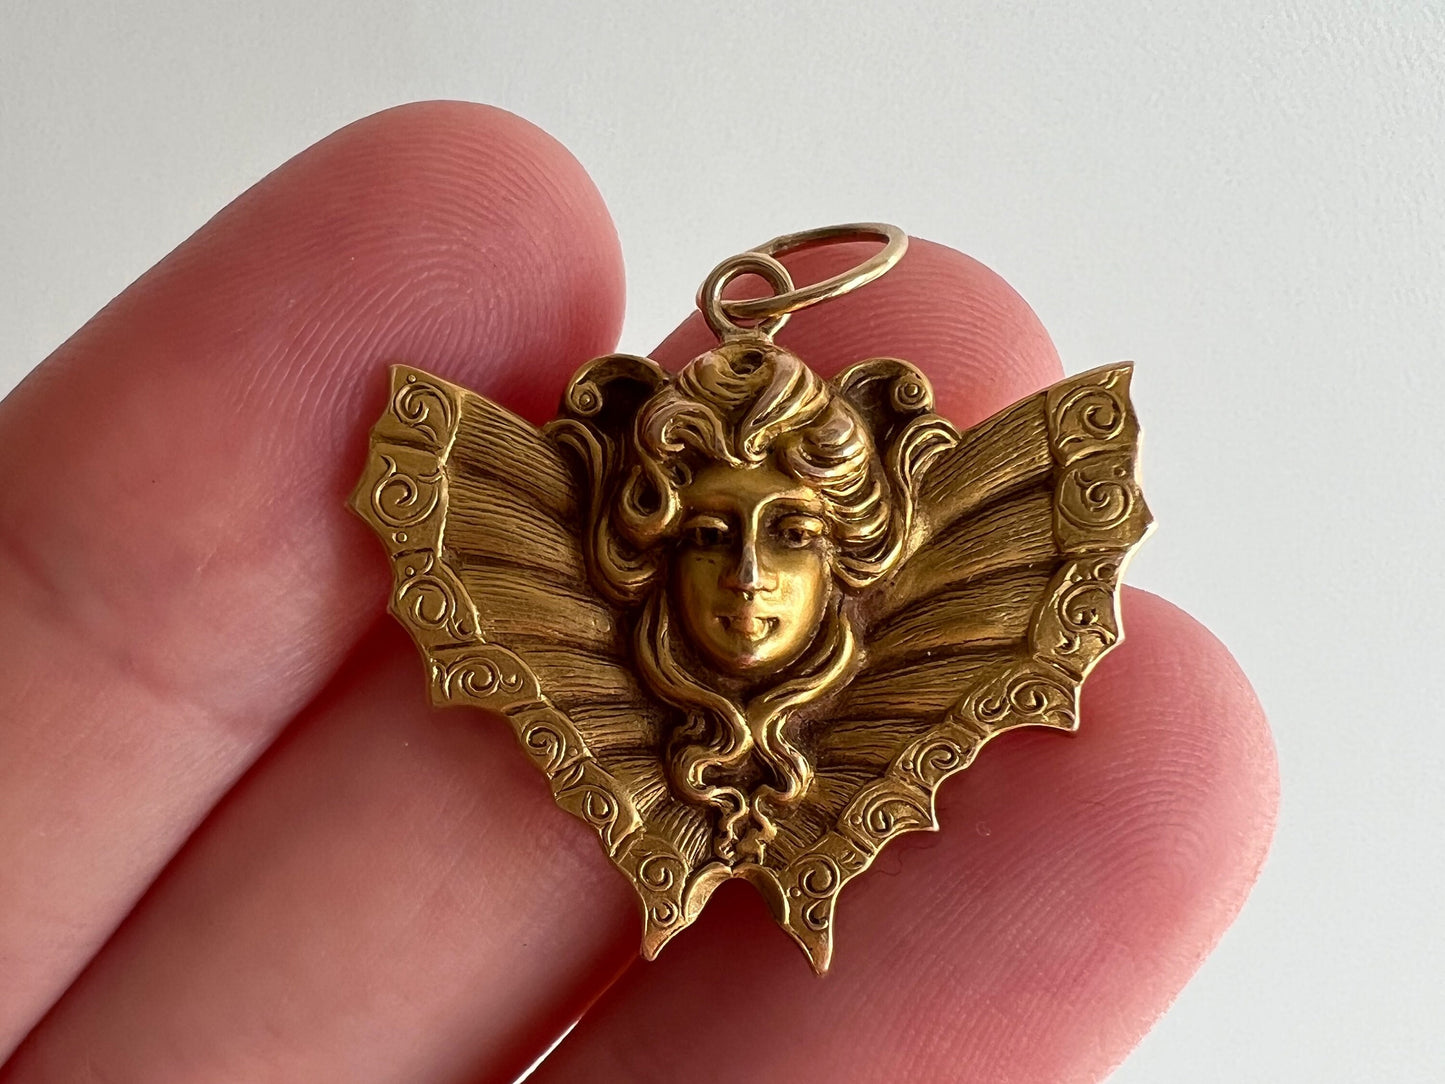 reimagined V I N T A G E // winged femme / 10k solid yellow gold / pin conversion pendant / moth lady face goddess butterfly